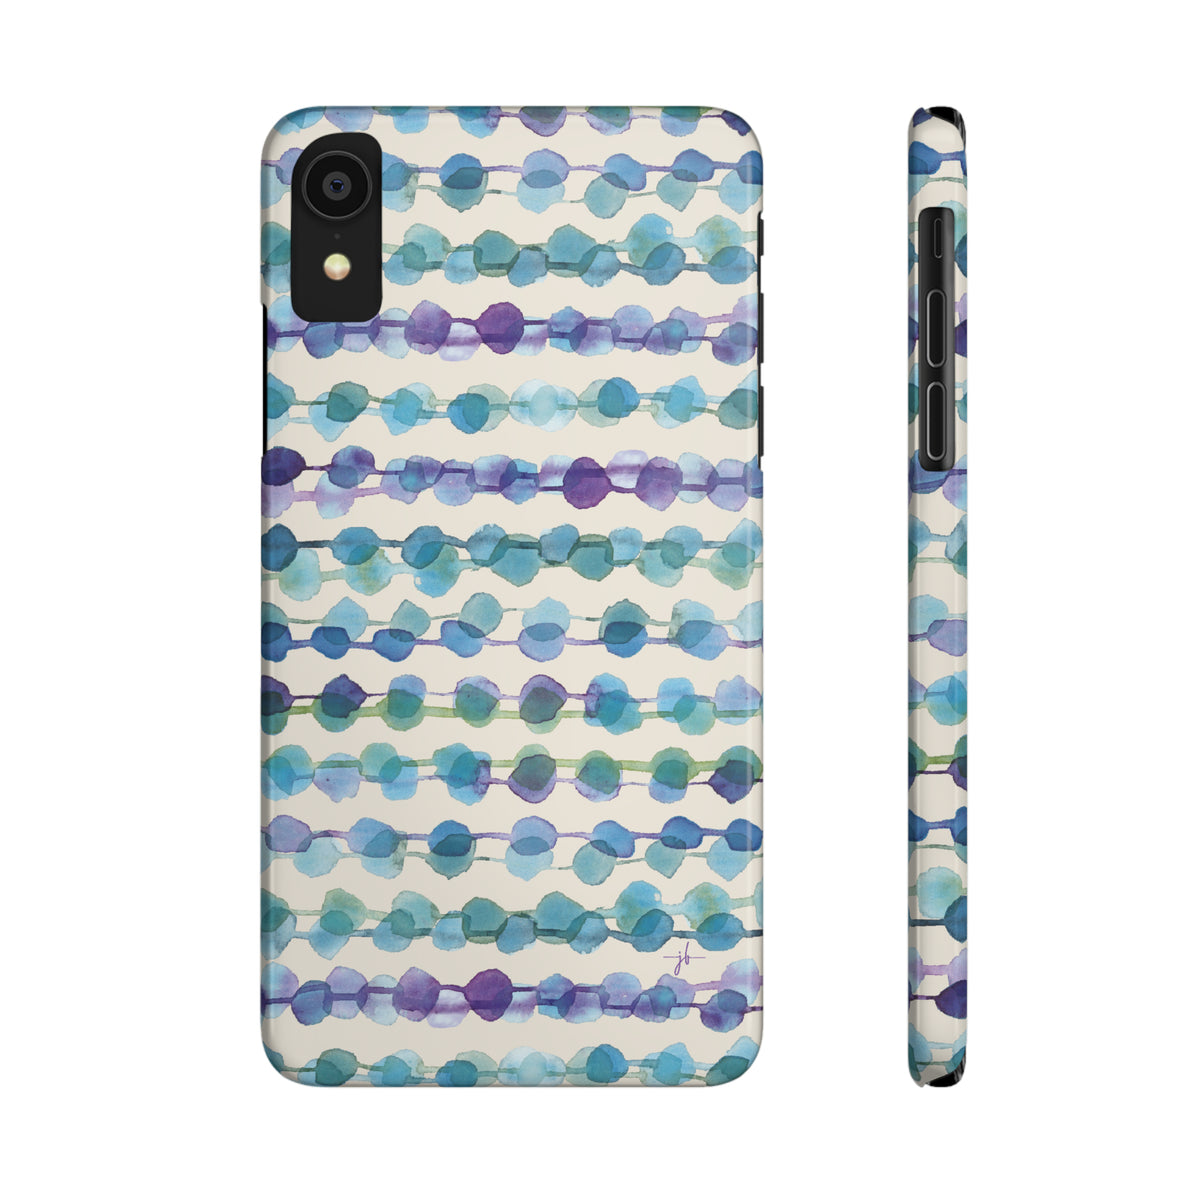 watercolor geometric striped pattern on iPhone case shown from front and side